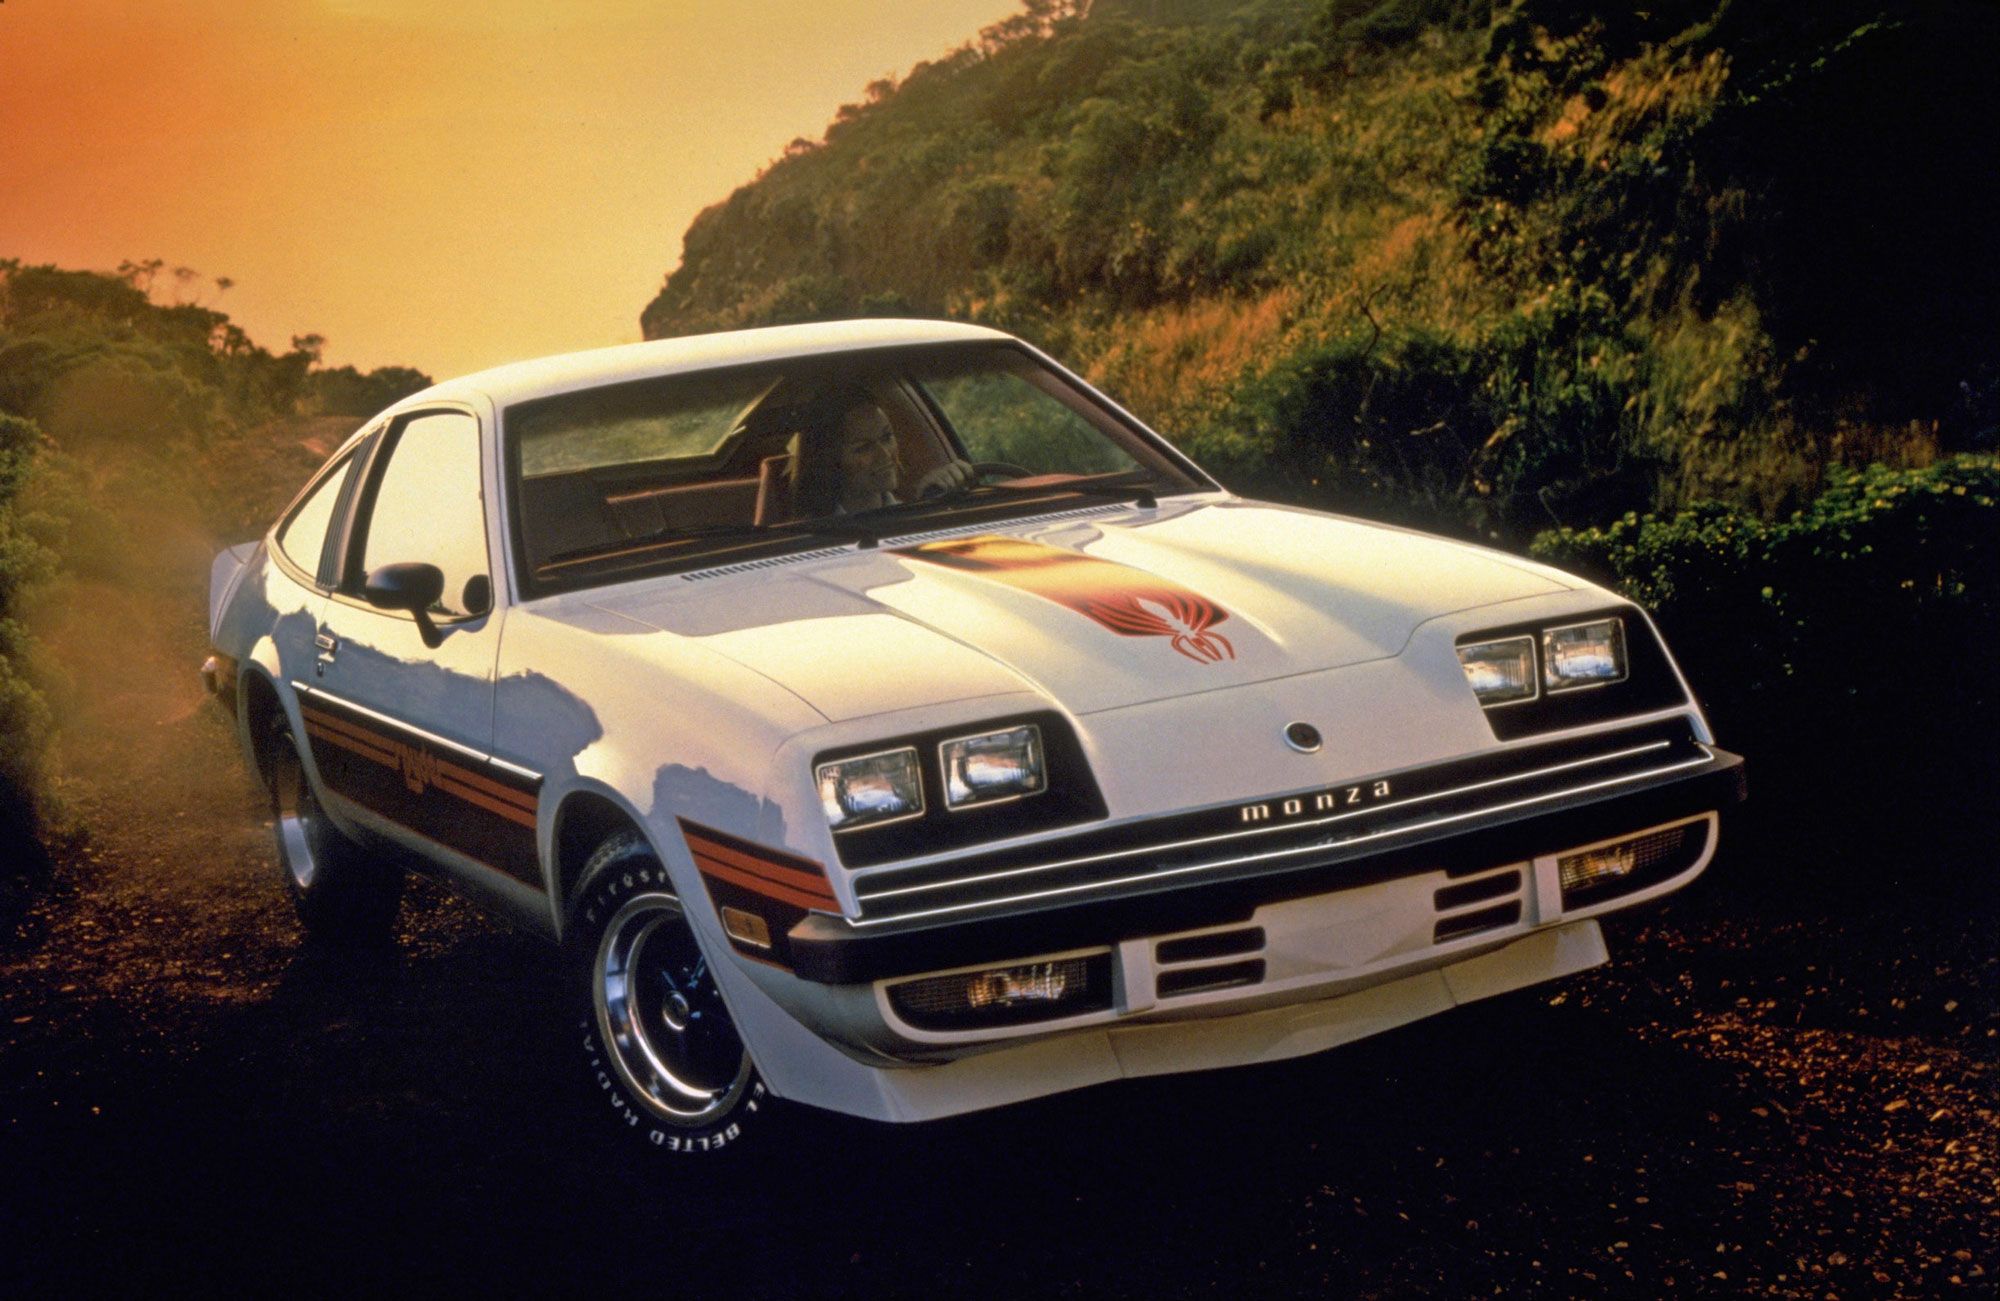 Chevy Monza 1977 White girl driving